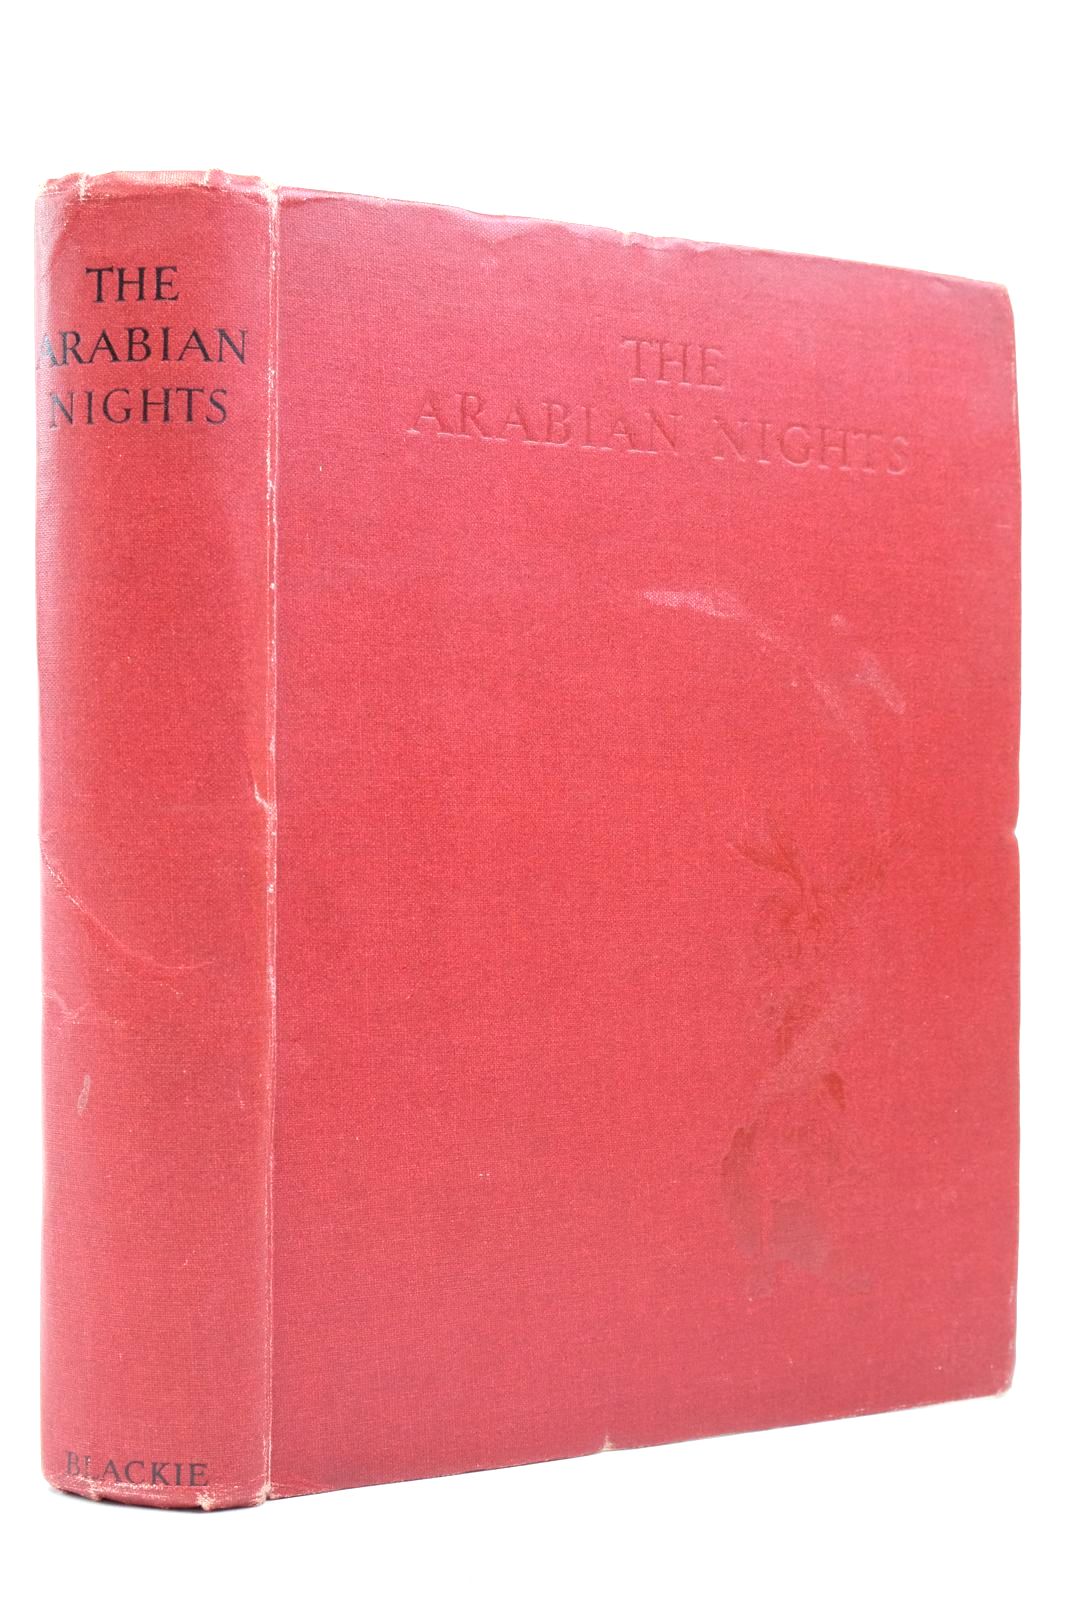 Photo of THE ARABIAN NIGHTS written by Davidson, Gladys illustrated by Bull, Rene published by Blackie &amp; Son Ltd. (STOCK CODE: 2140890)  for sale by Stella & Rose's Books